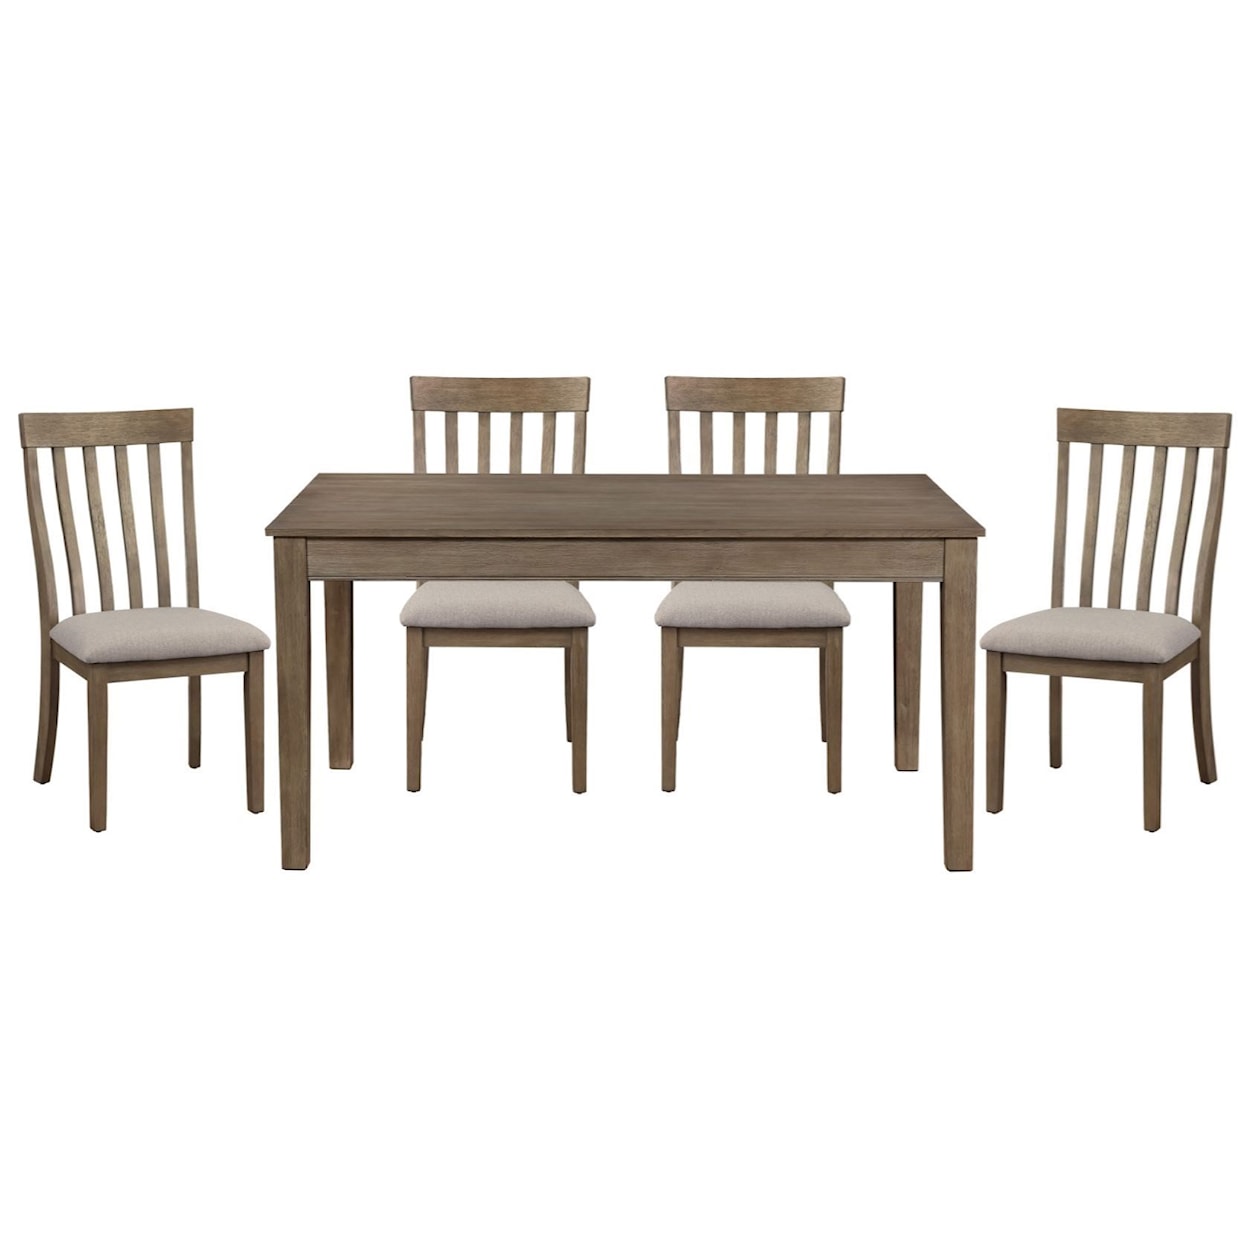 Homelegance Armhurst 5-Piece Table and Chair Set